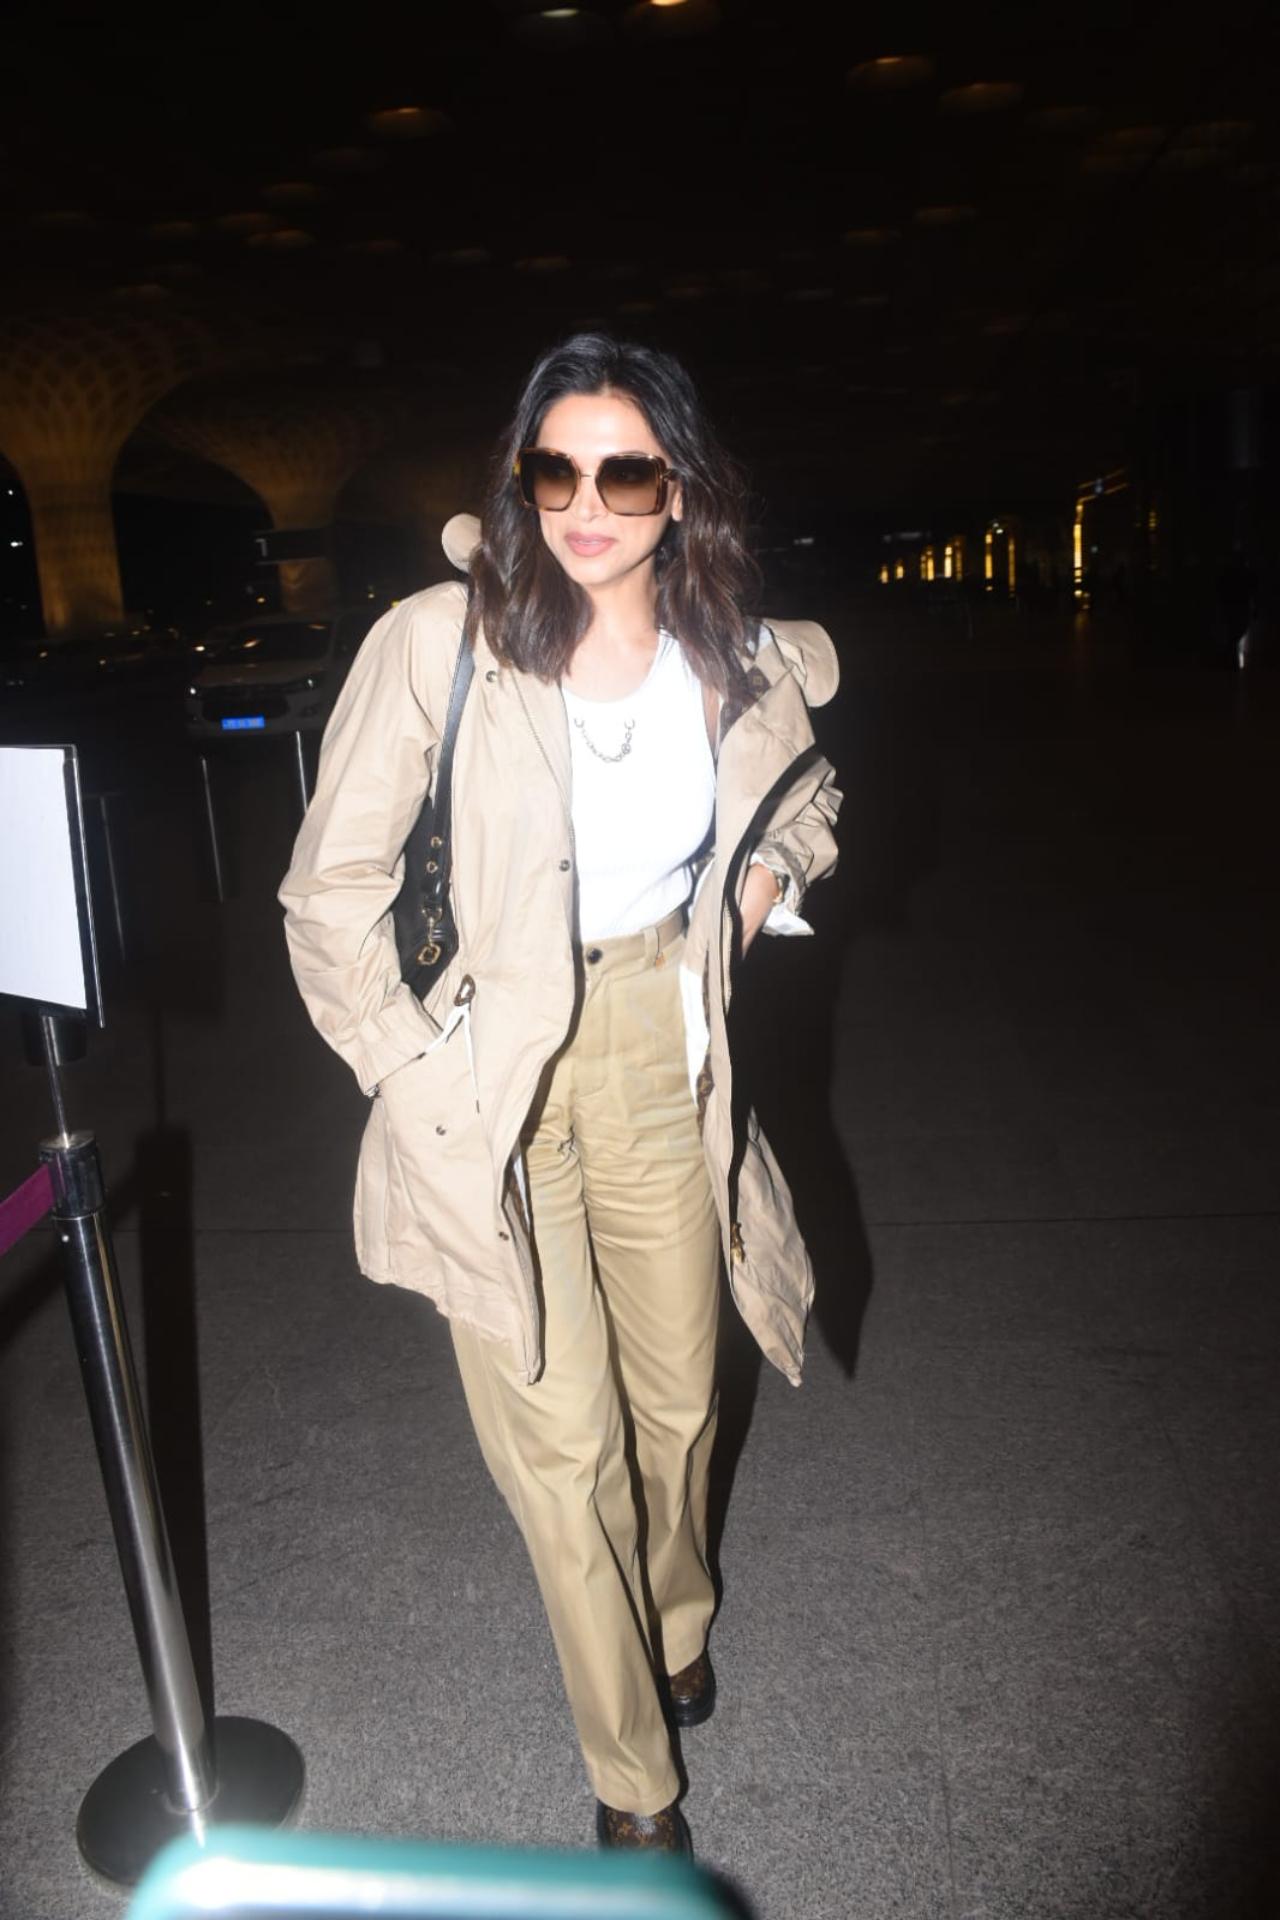 On Saturday morning, Deepika was seen at the airport dressed in a white top, khakee trench coat and matching pants. She left her hair open and had black shades on. The actress was all smiles as she waved to the paparazzi